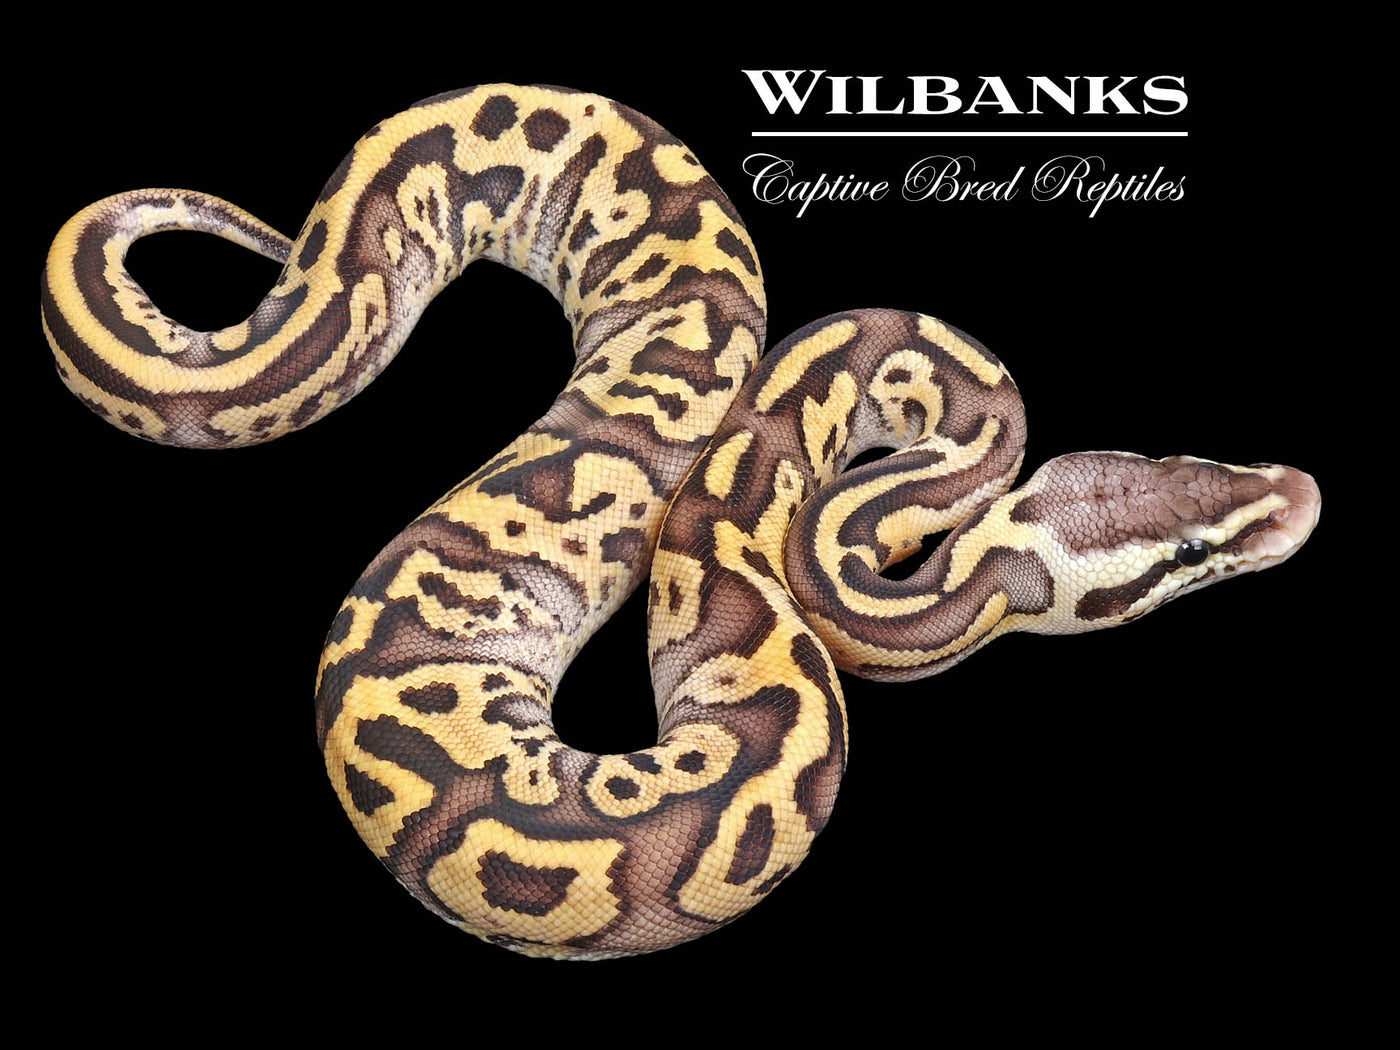 FireFly Leopard Yellow Belly Ball Python ♀ '23